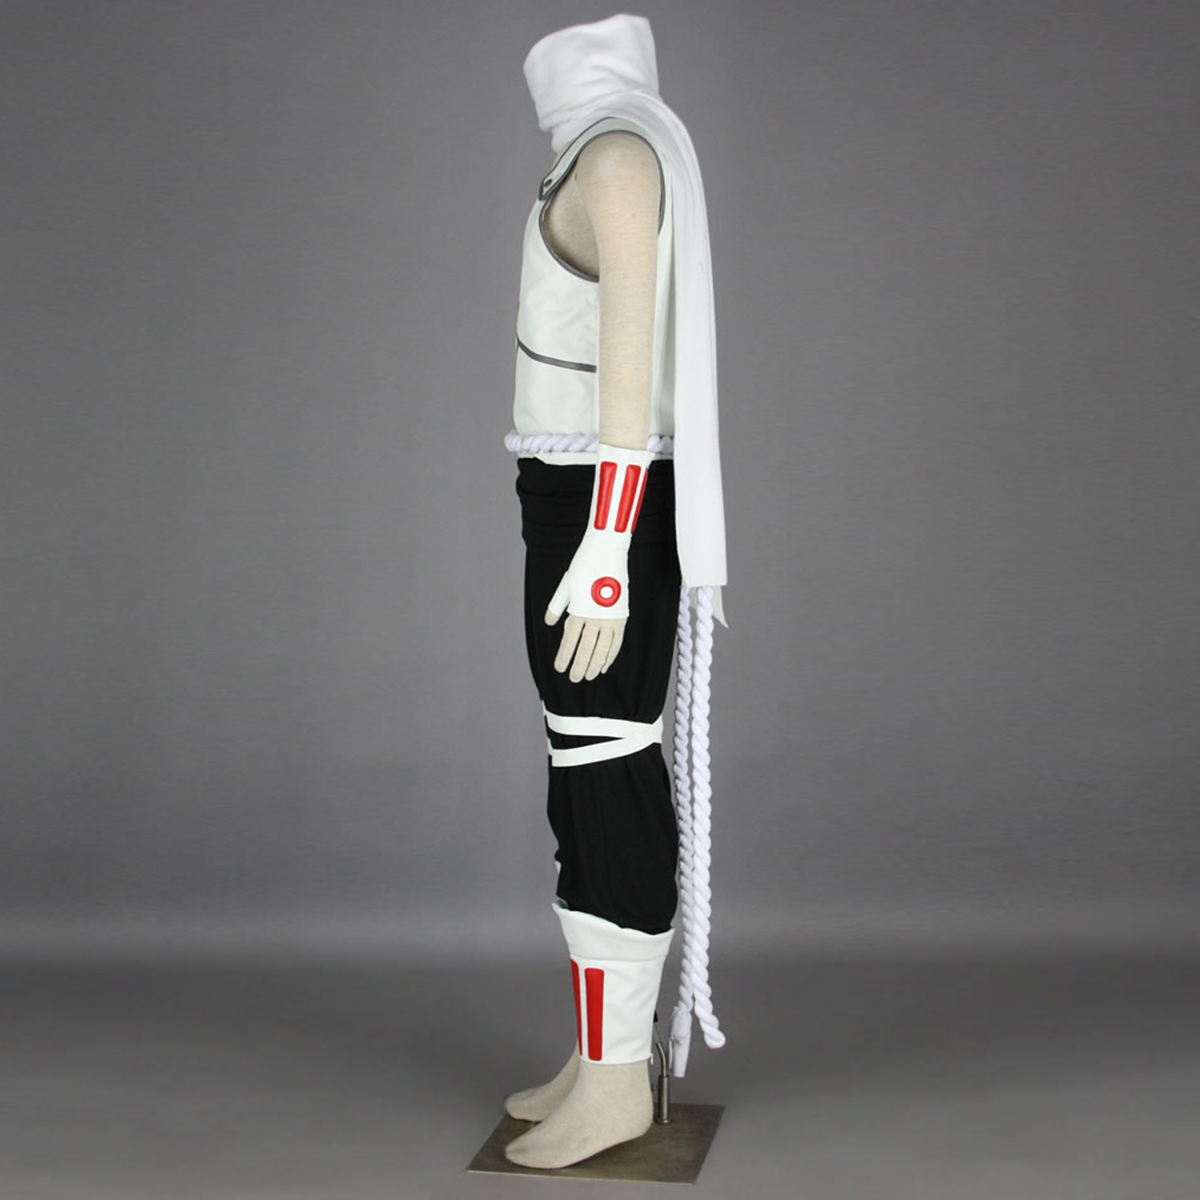 Naruto Killer B 1 Anime Cosplay Costumes Outfit